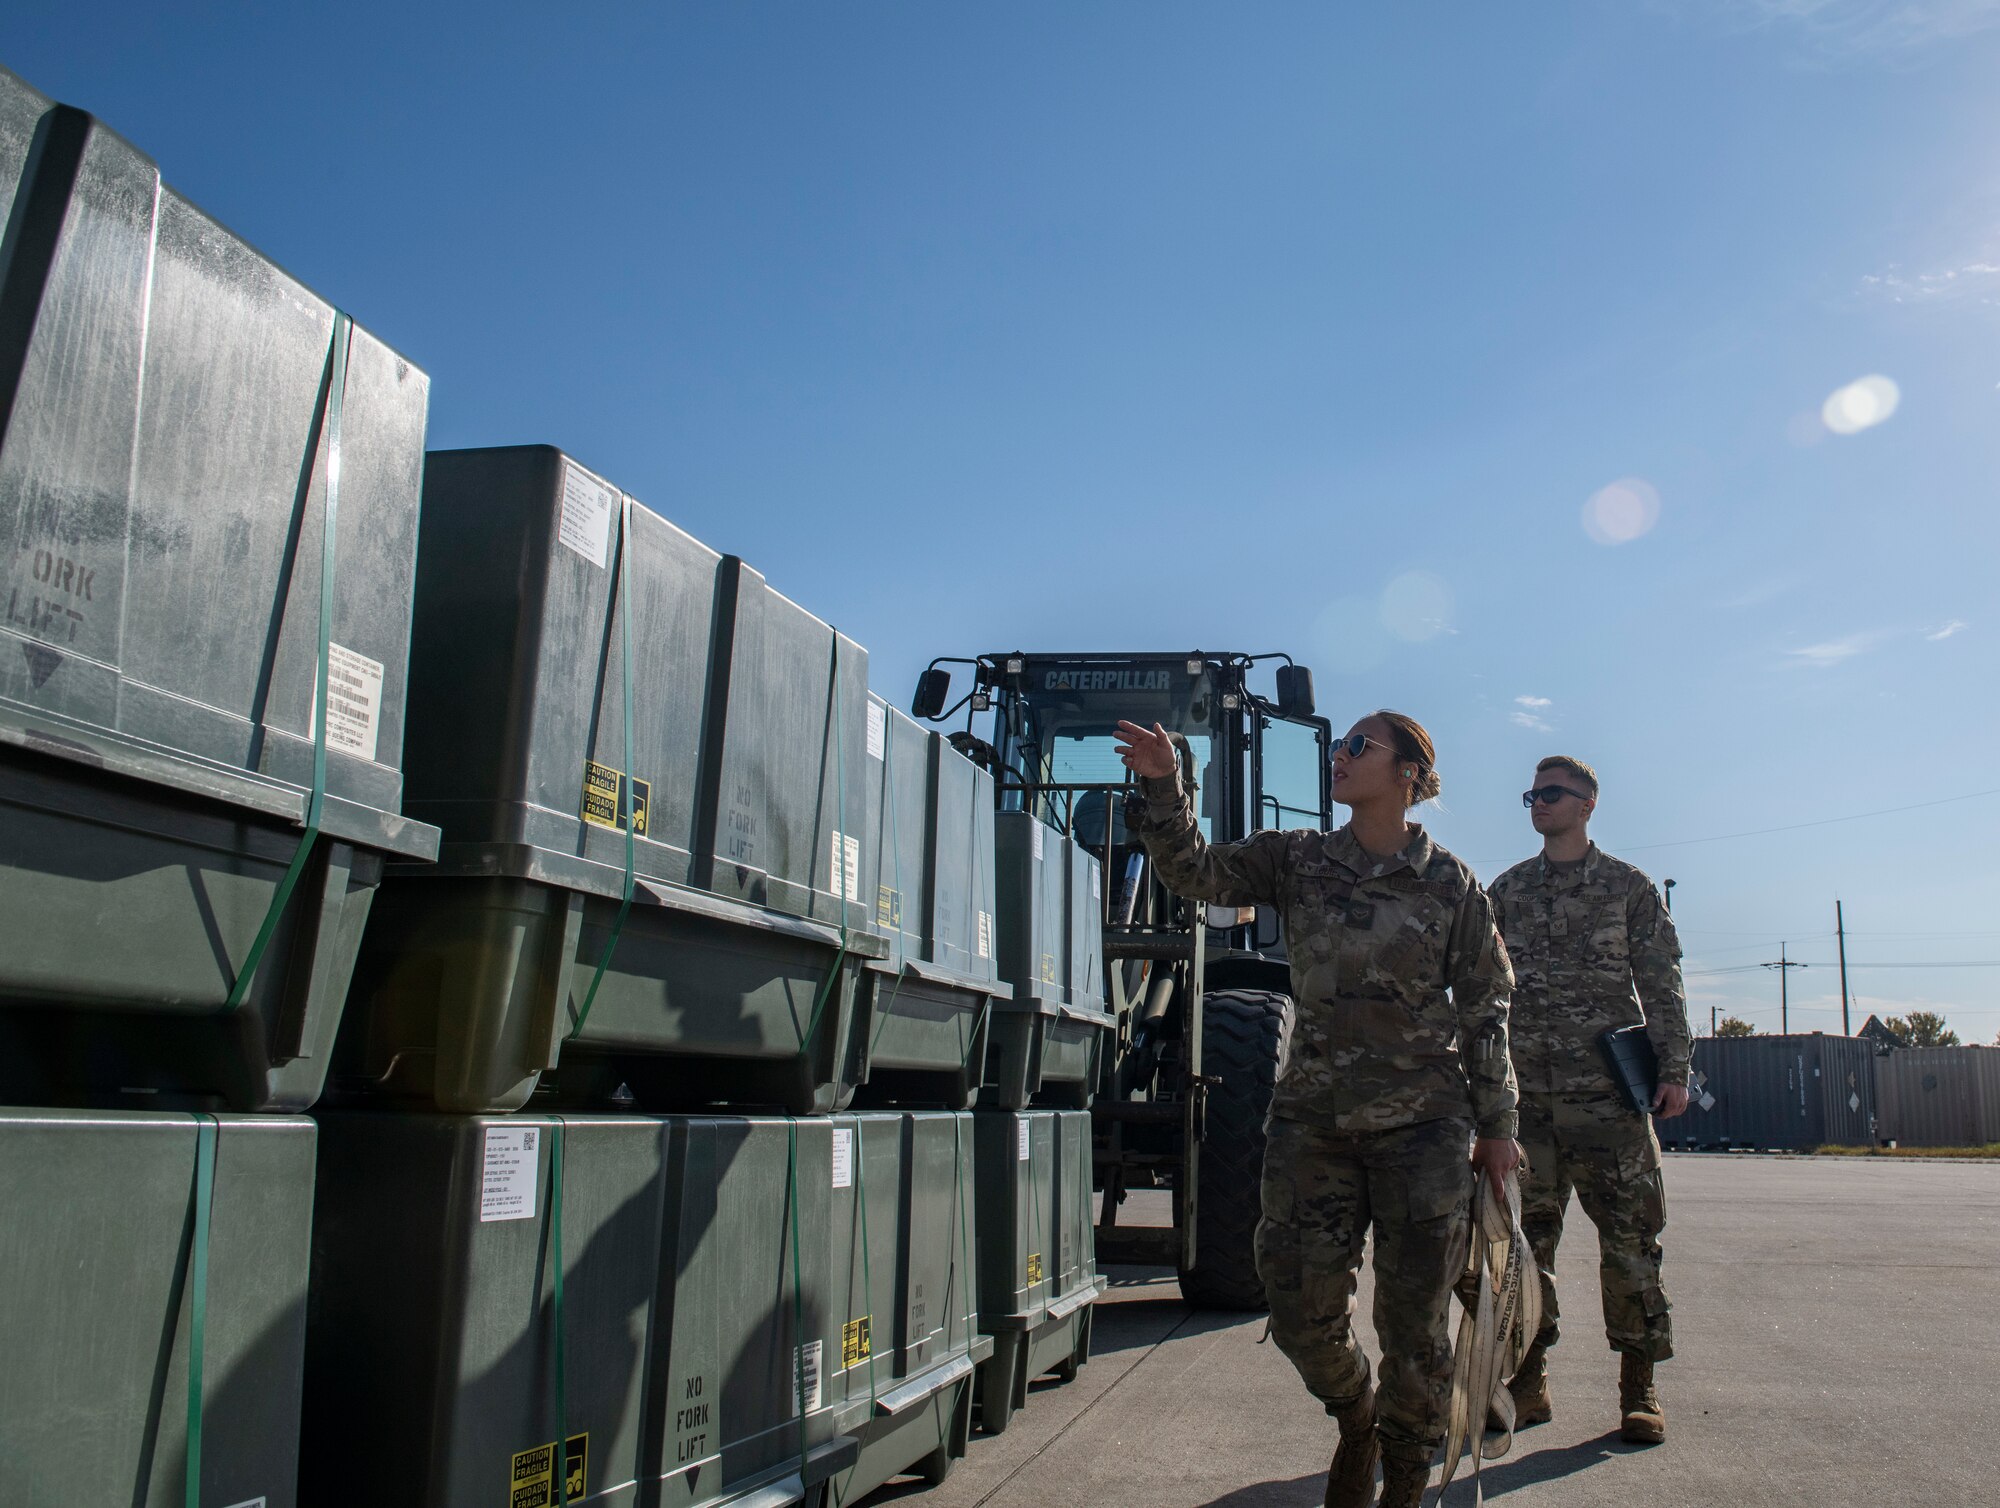 Stockpile management technicians, from the 8th Maintenance Squadron, inspect storage containers at Kunsan Air Base, Republic of Korea, Oct. 29, 2021. Munitions Airmen work with extreme care to handle, store, transport, arm and disarm weapons systems. (U.S. Air Force photo by Staff Sgt. Suzie Plotnikov)